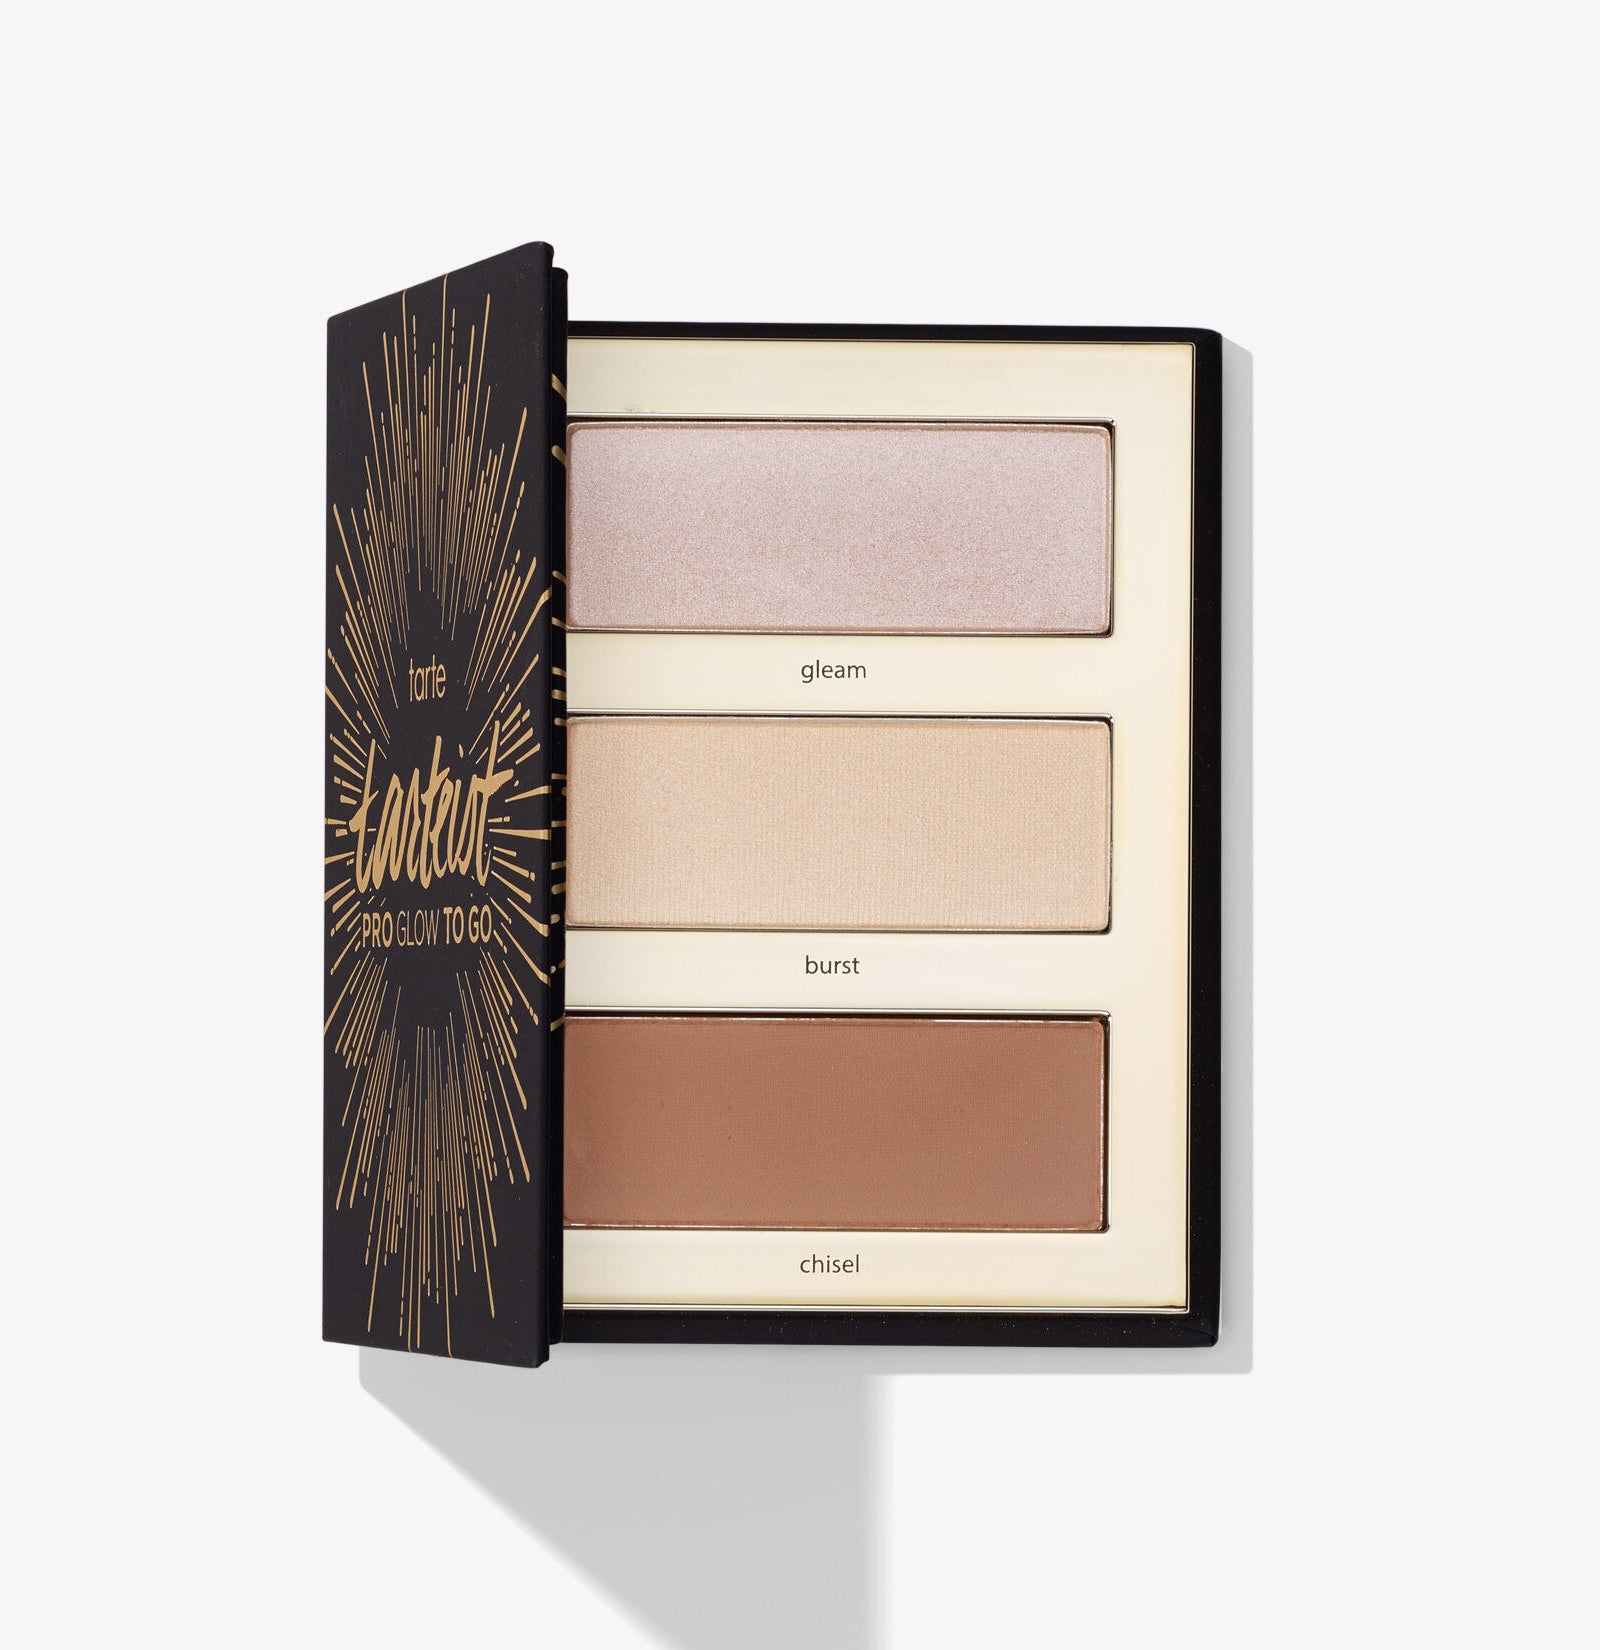 tarte highlight and contour palette with two shades of highlight and one shade of contour